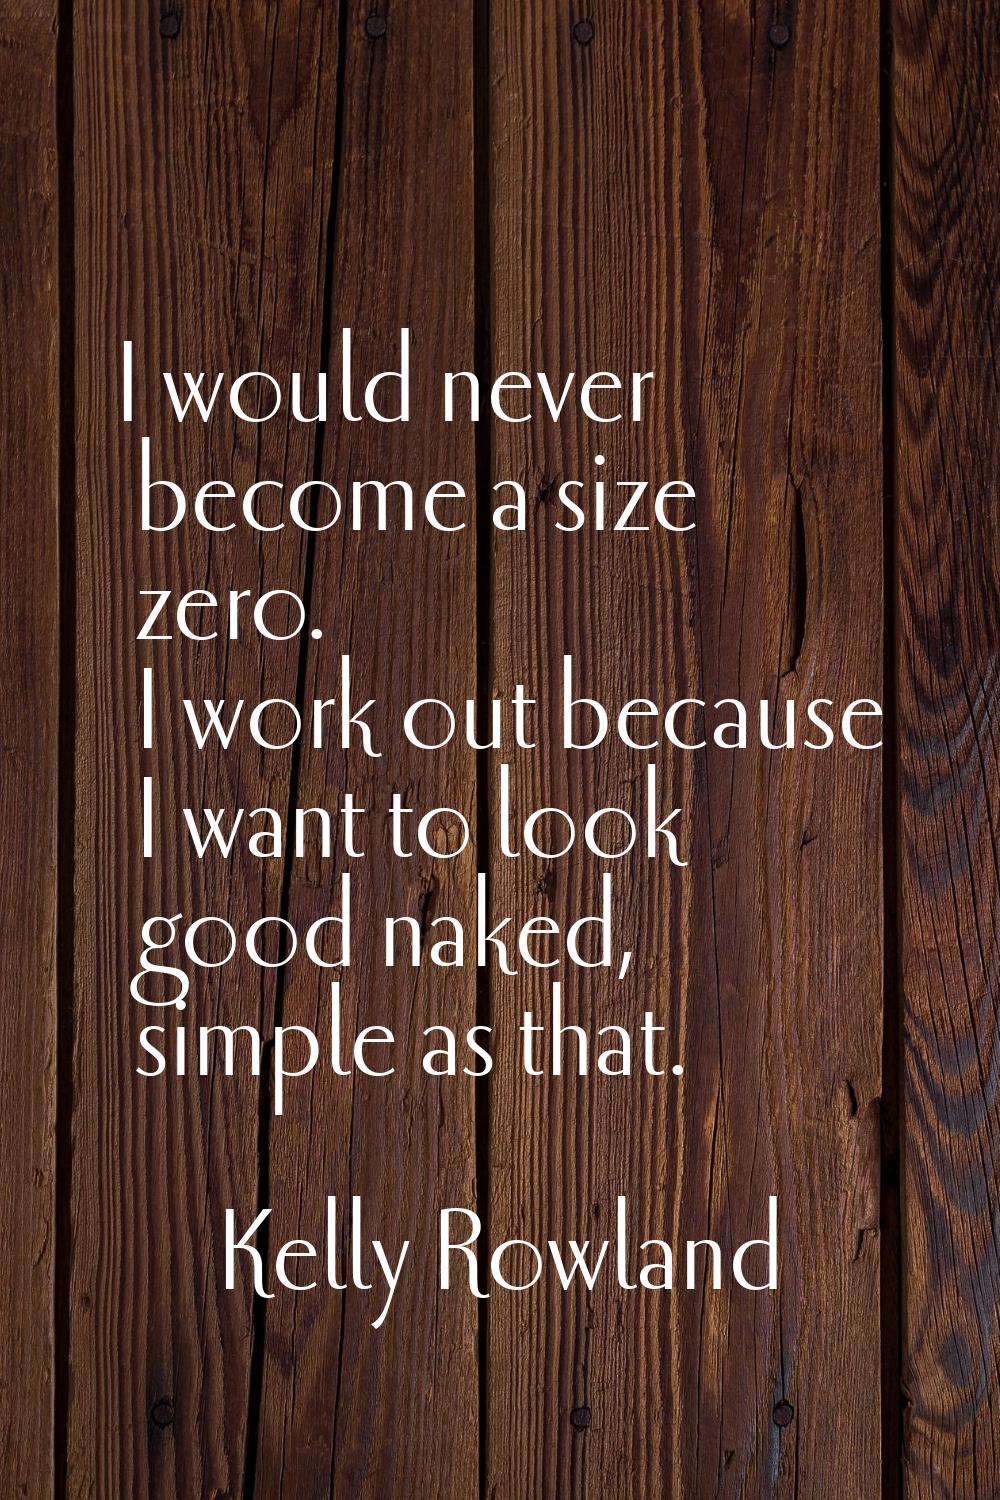 I would never become a size zero. I work out because I want to look good naked, simple as that.